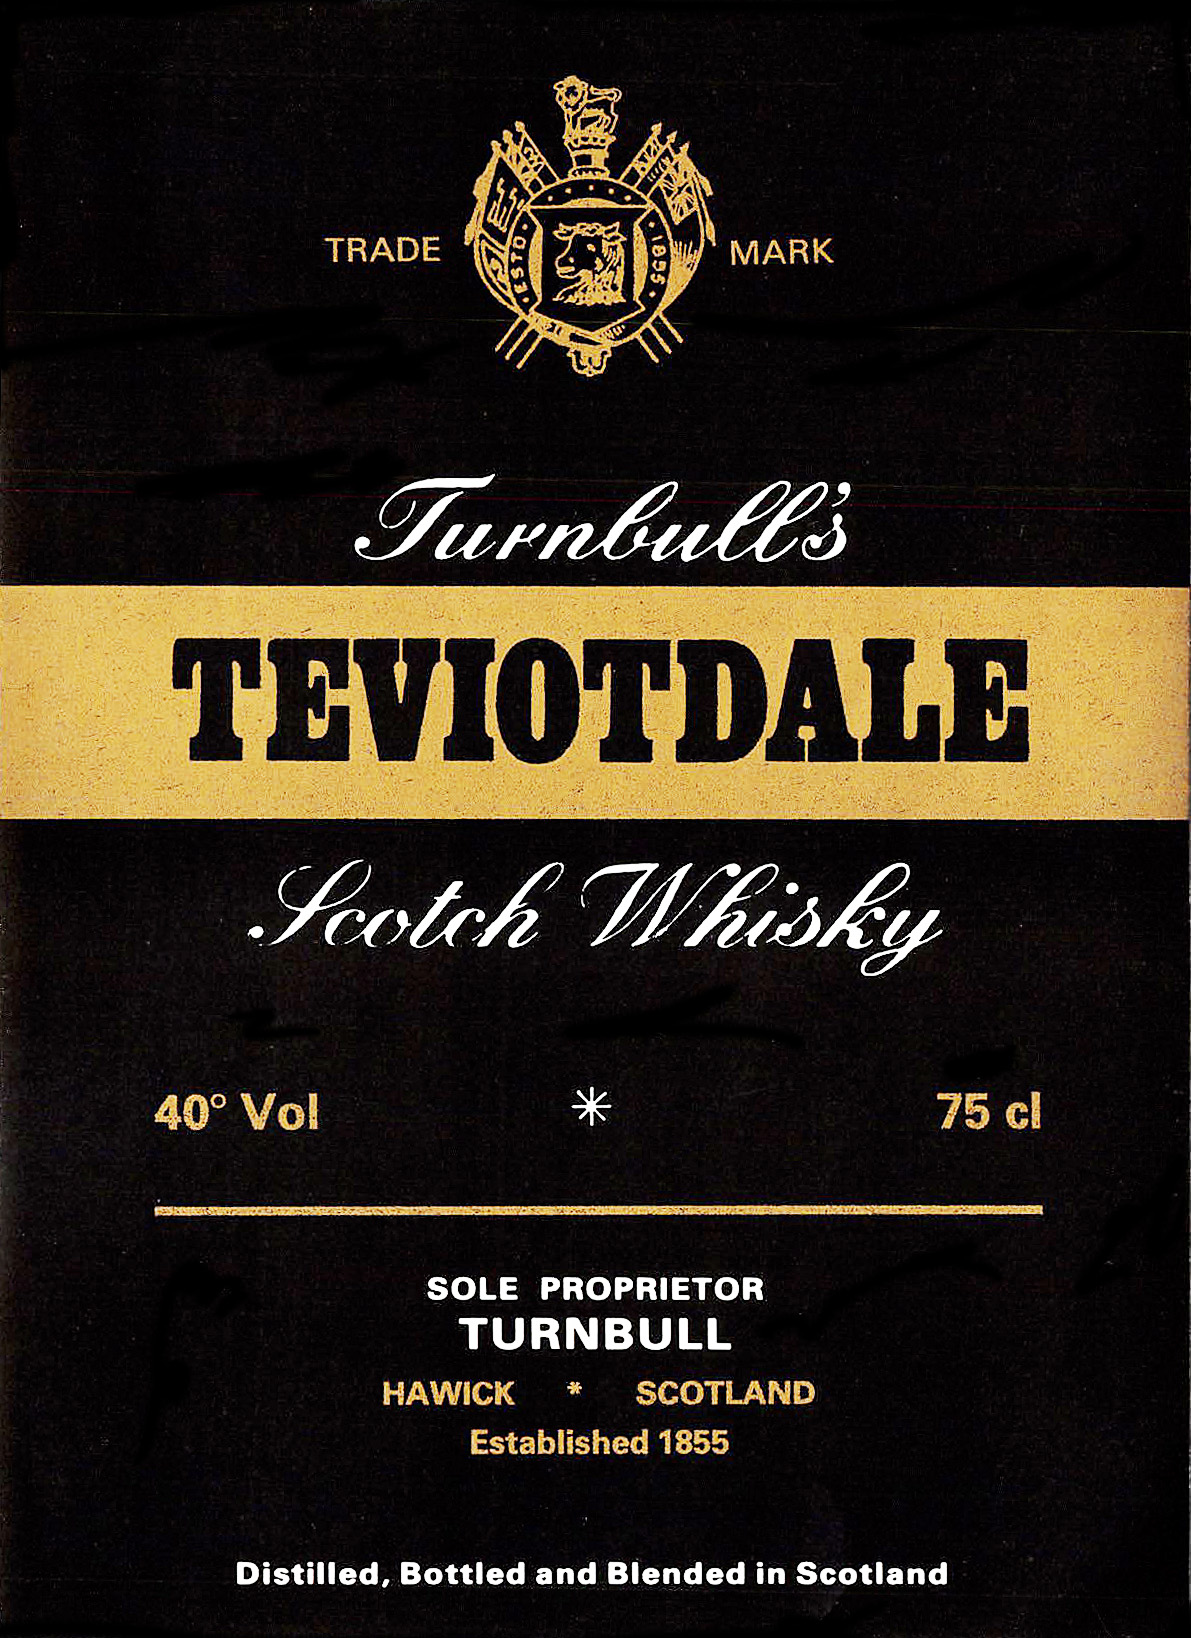 Turnbull’s Teviotdale Scotch Whisky Label